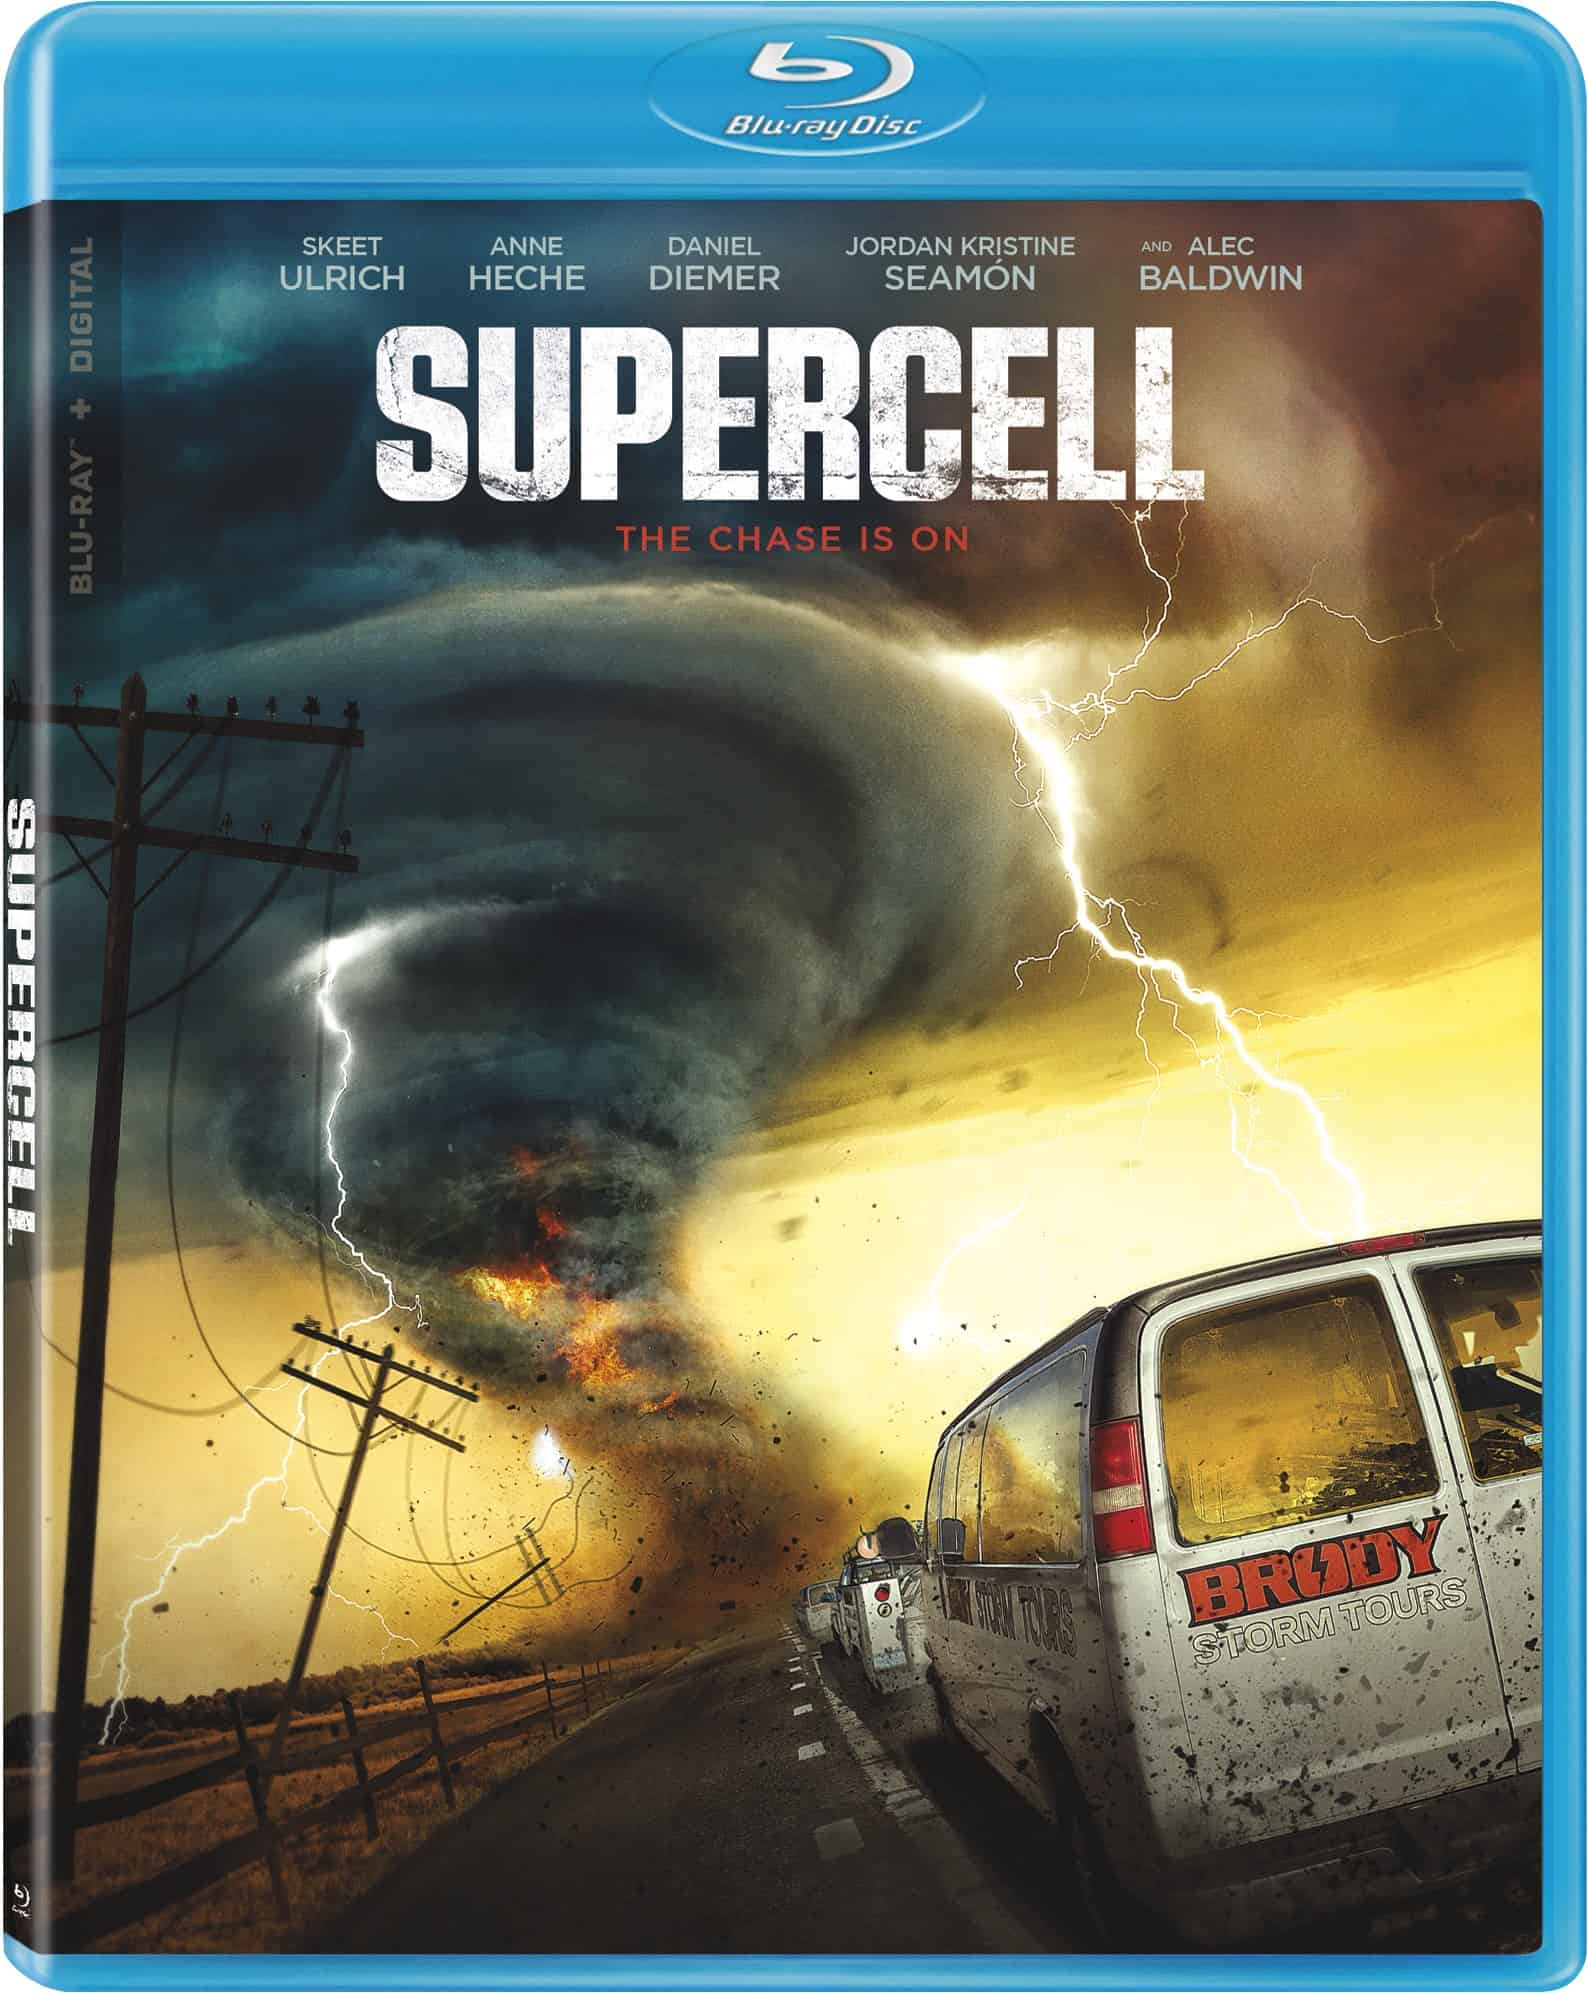 Supercell comes to Blu-ray on May 2nd 32